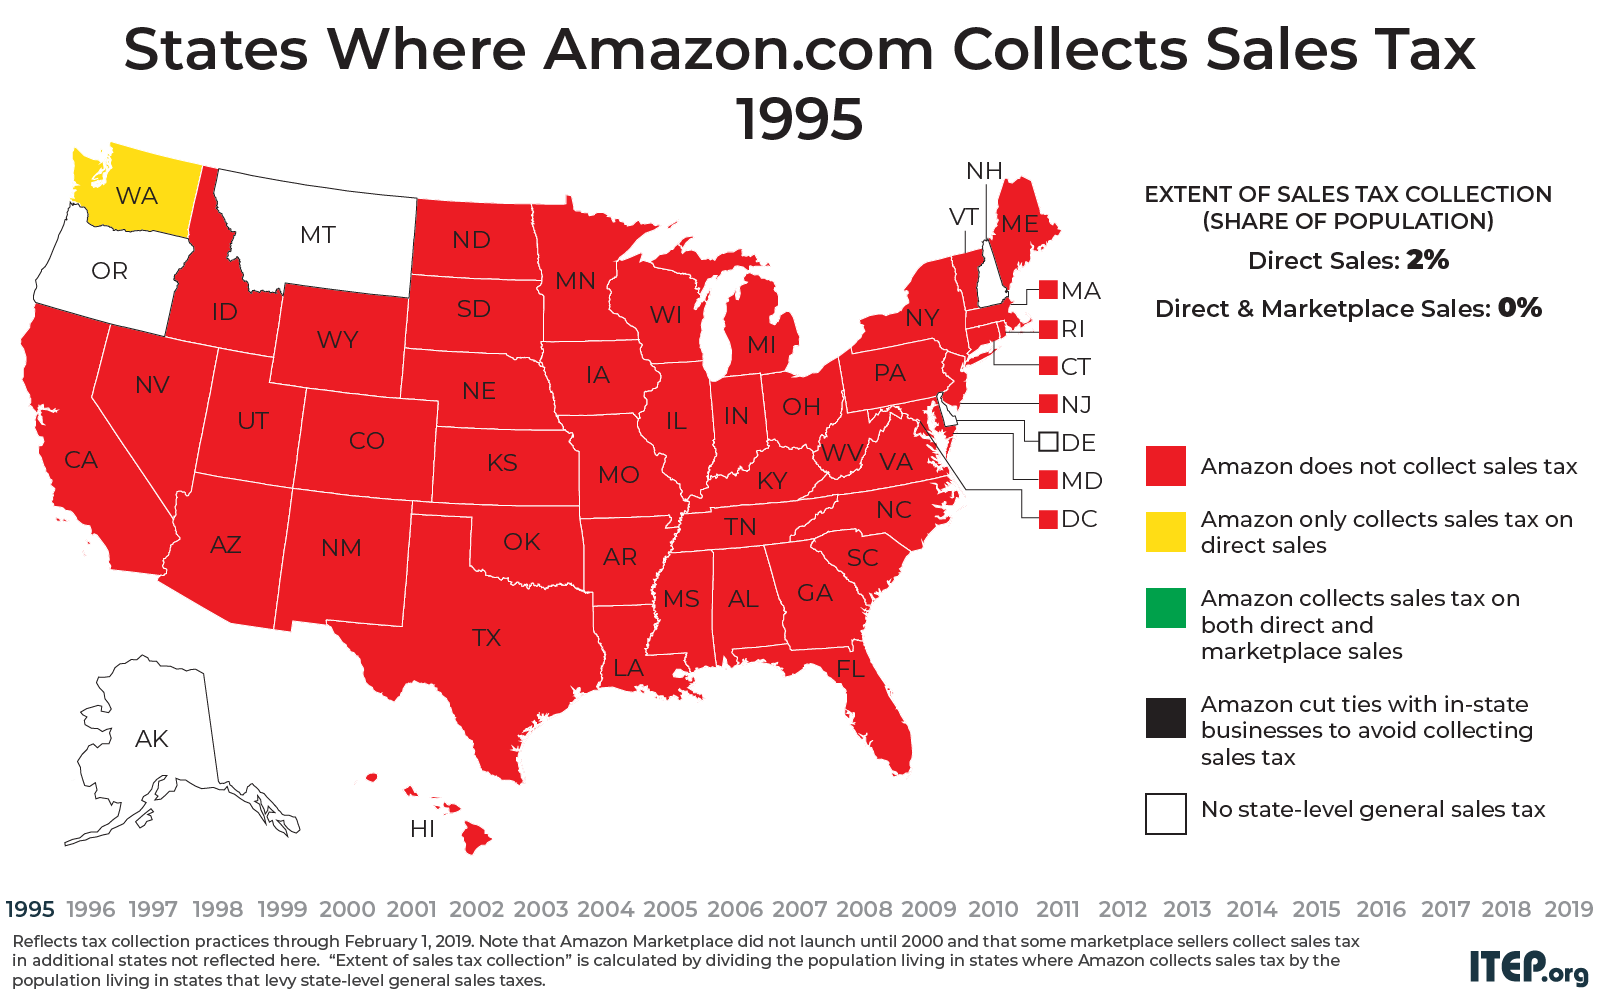 Gaps in Sales Tax Collection Linger at Amazon.com and Among Other E-Retailers